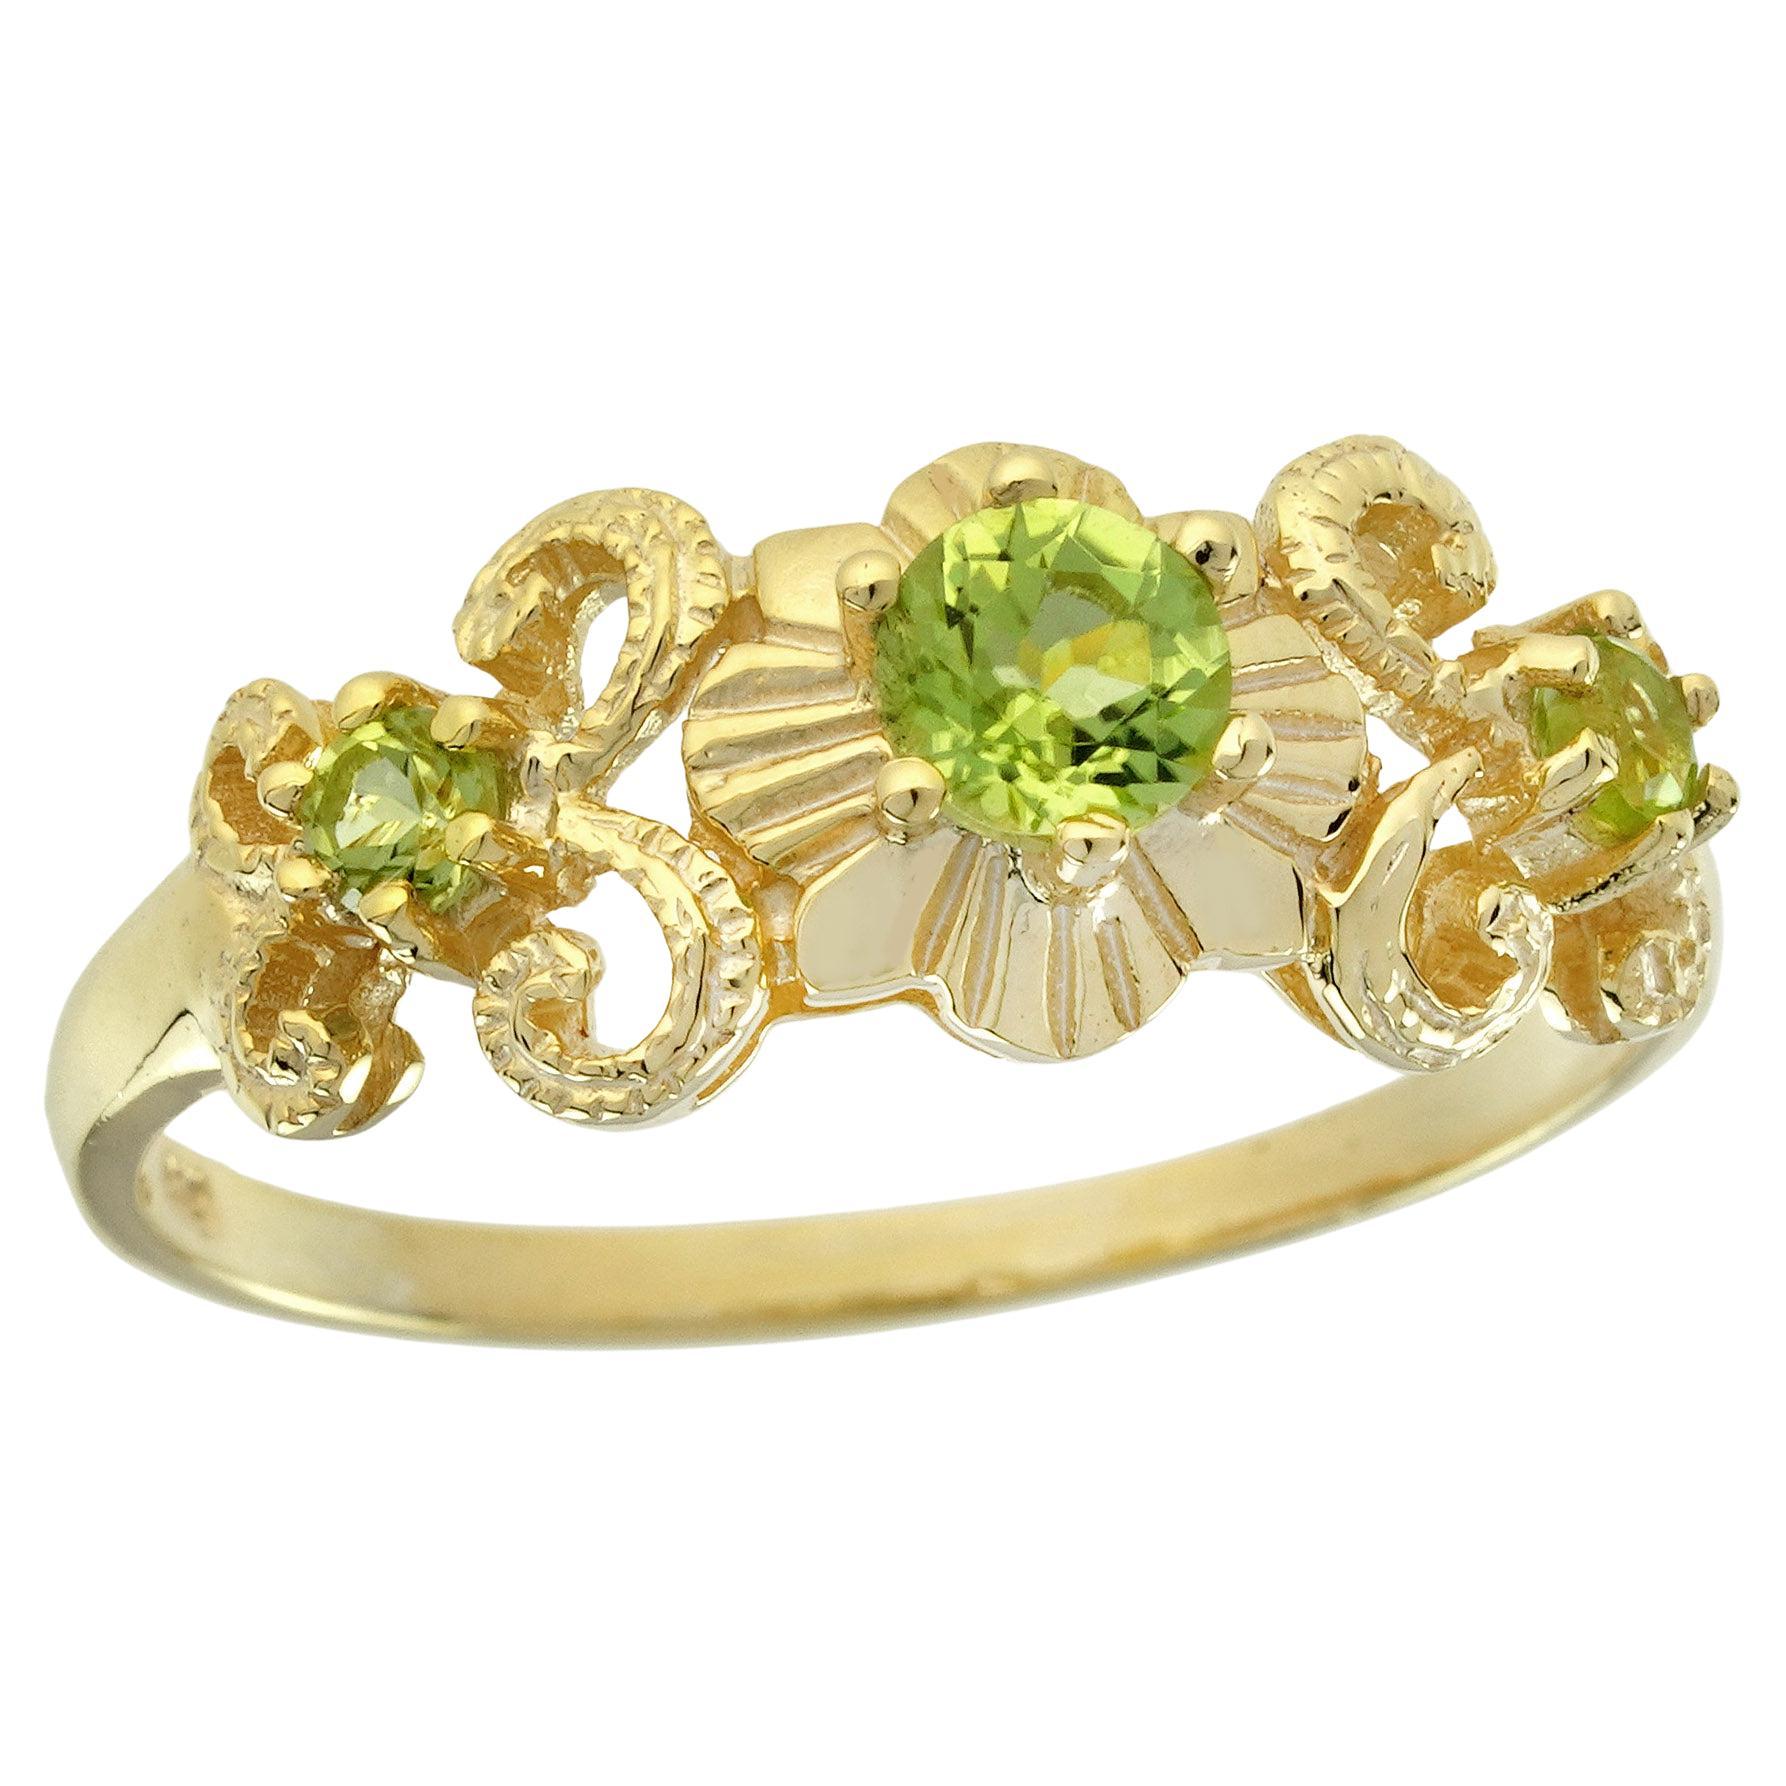 Natural Peridot Vintage Style Ring in Solid 9K Yellow Gold